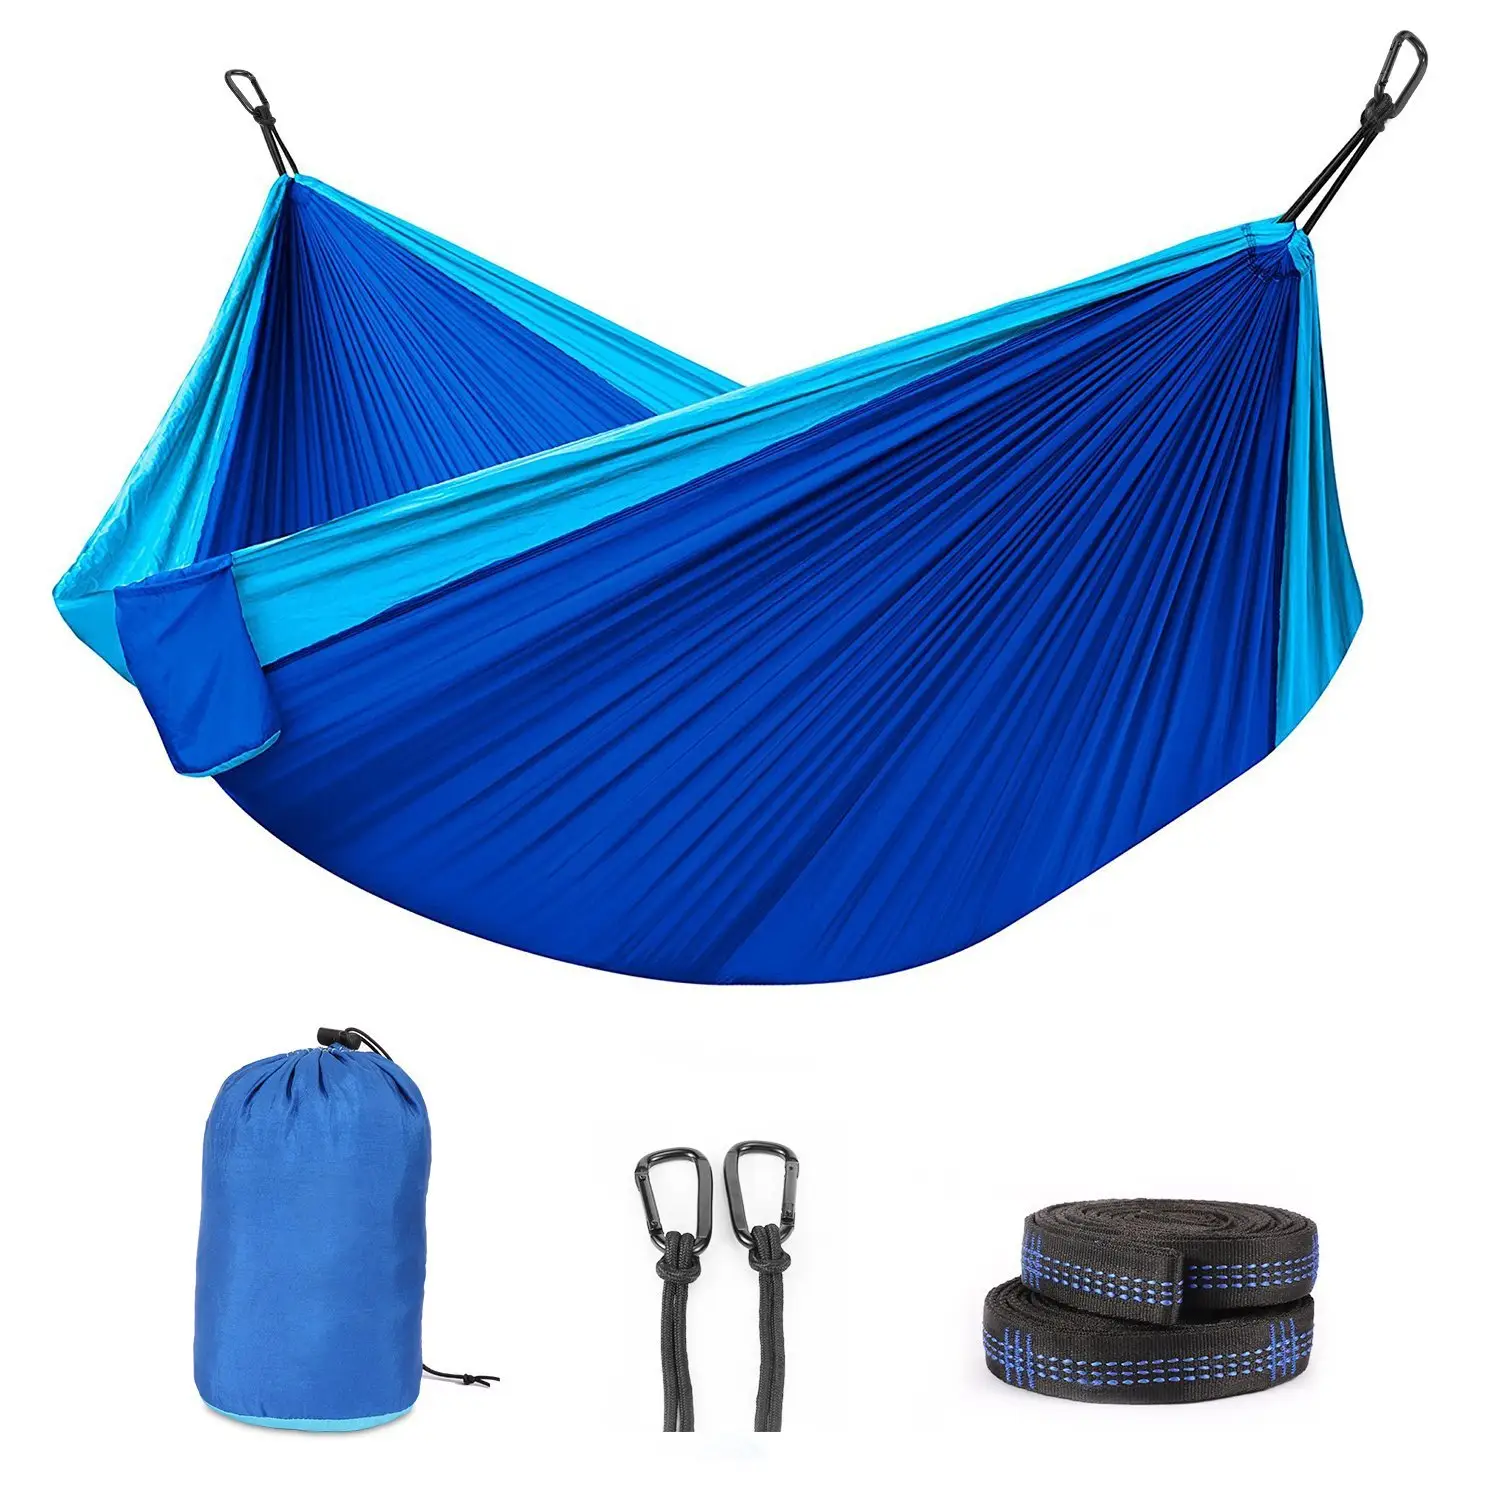 2023 Nieuwe Product Hoge Kwaliteit Outdoor Populaire Modieuze Draagbare Draagbare Dubbele Parachute Ripstop Nylon Camping Hangmat